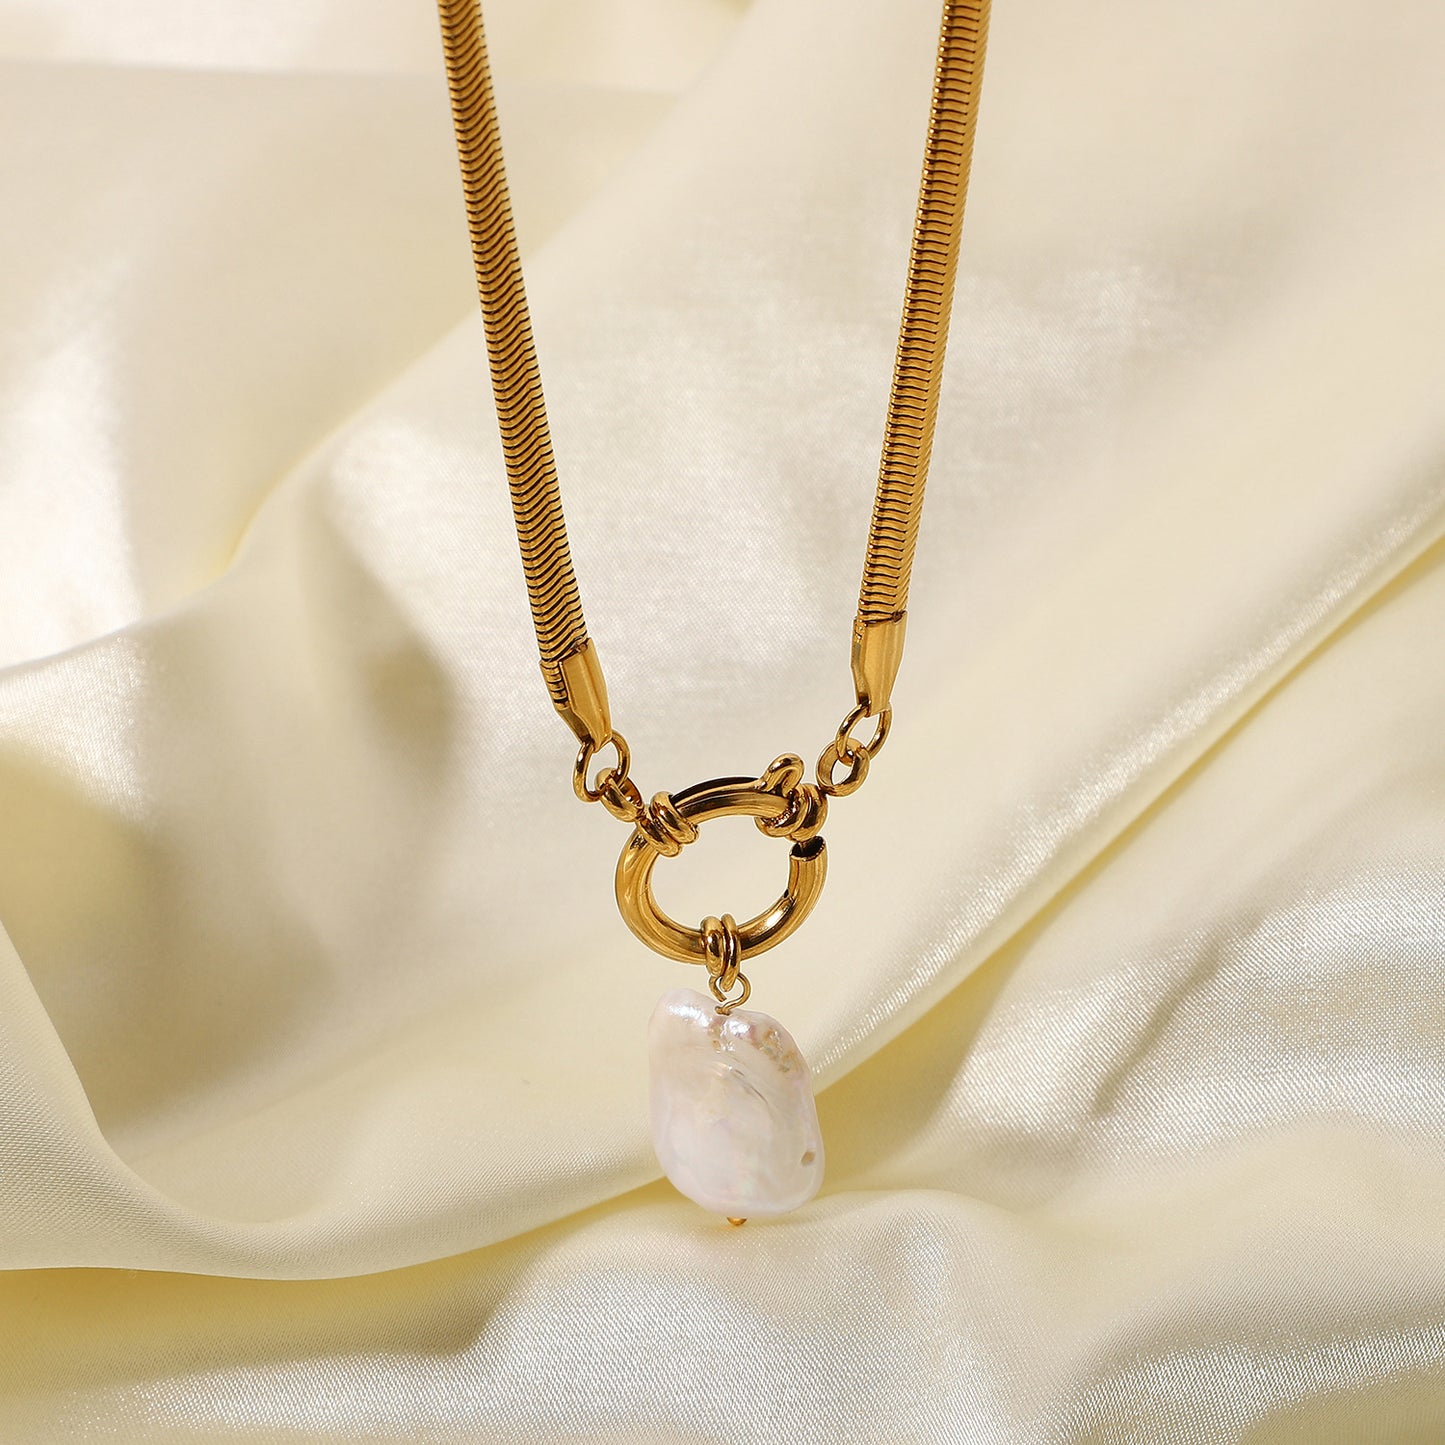 Pearl of the Ocean Pendant Snake Chain Necklace.